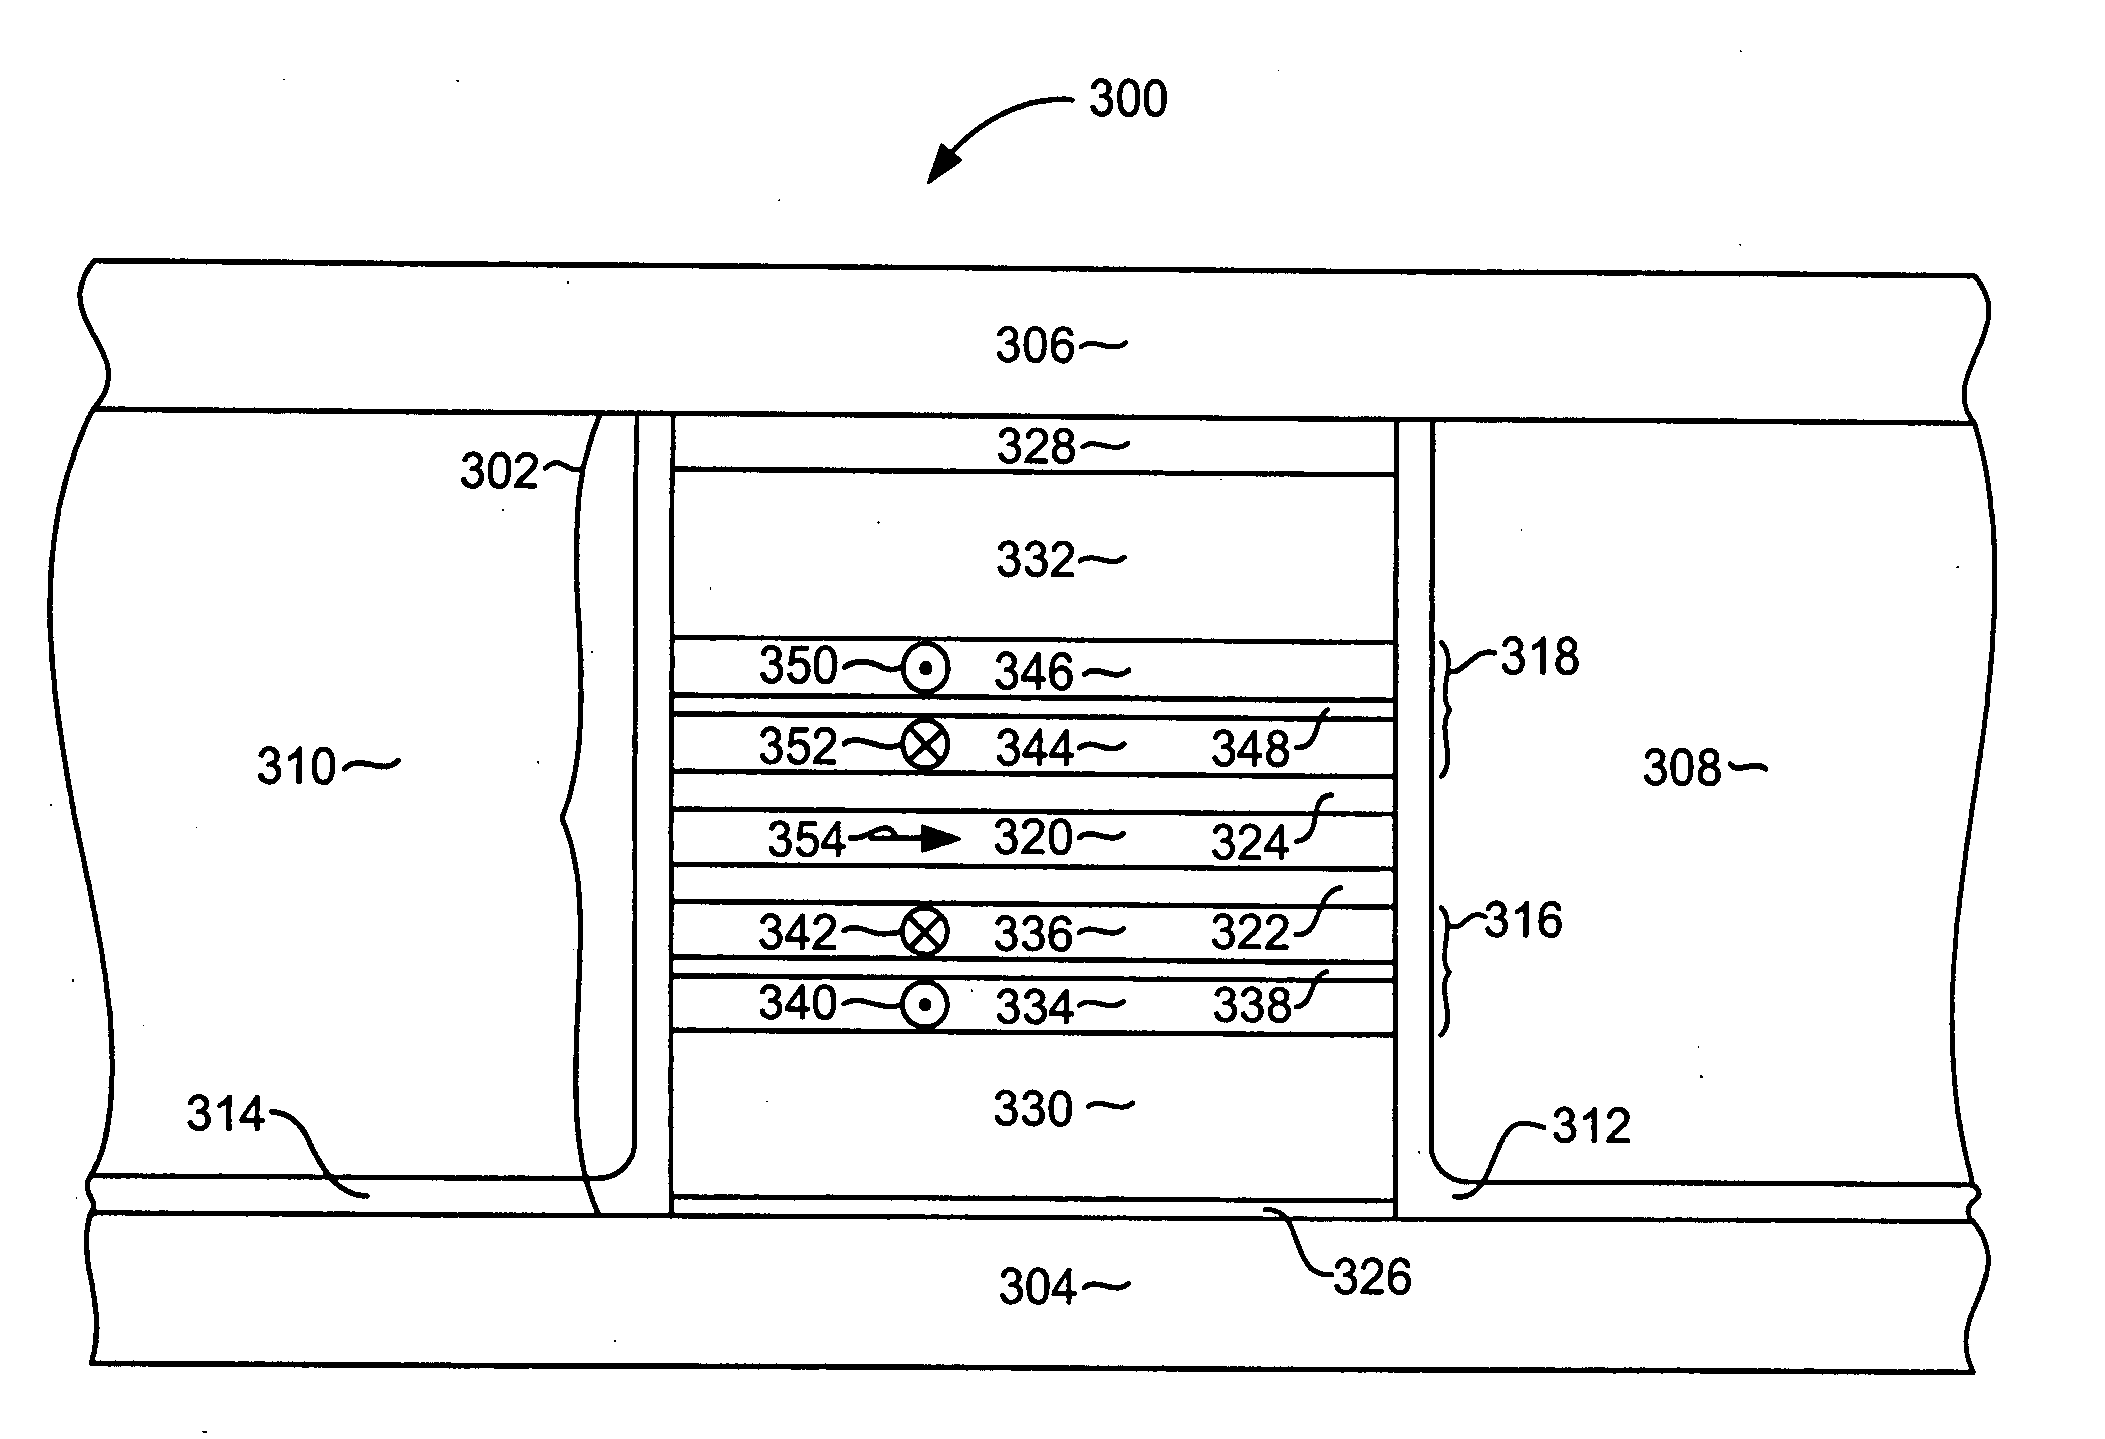 Current perpendicular to plane (CPP) magnetoresistive sensor with improved pinned layer